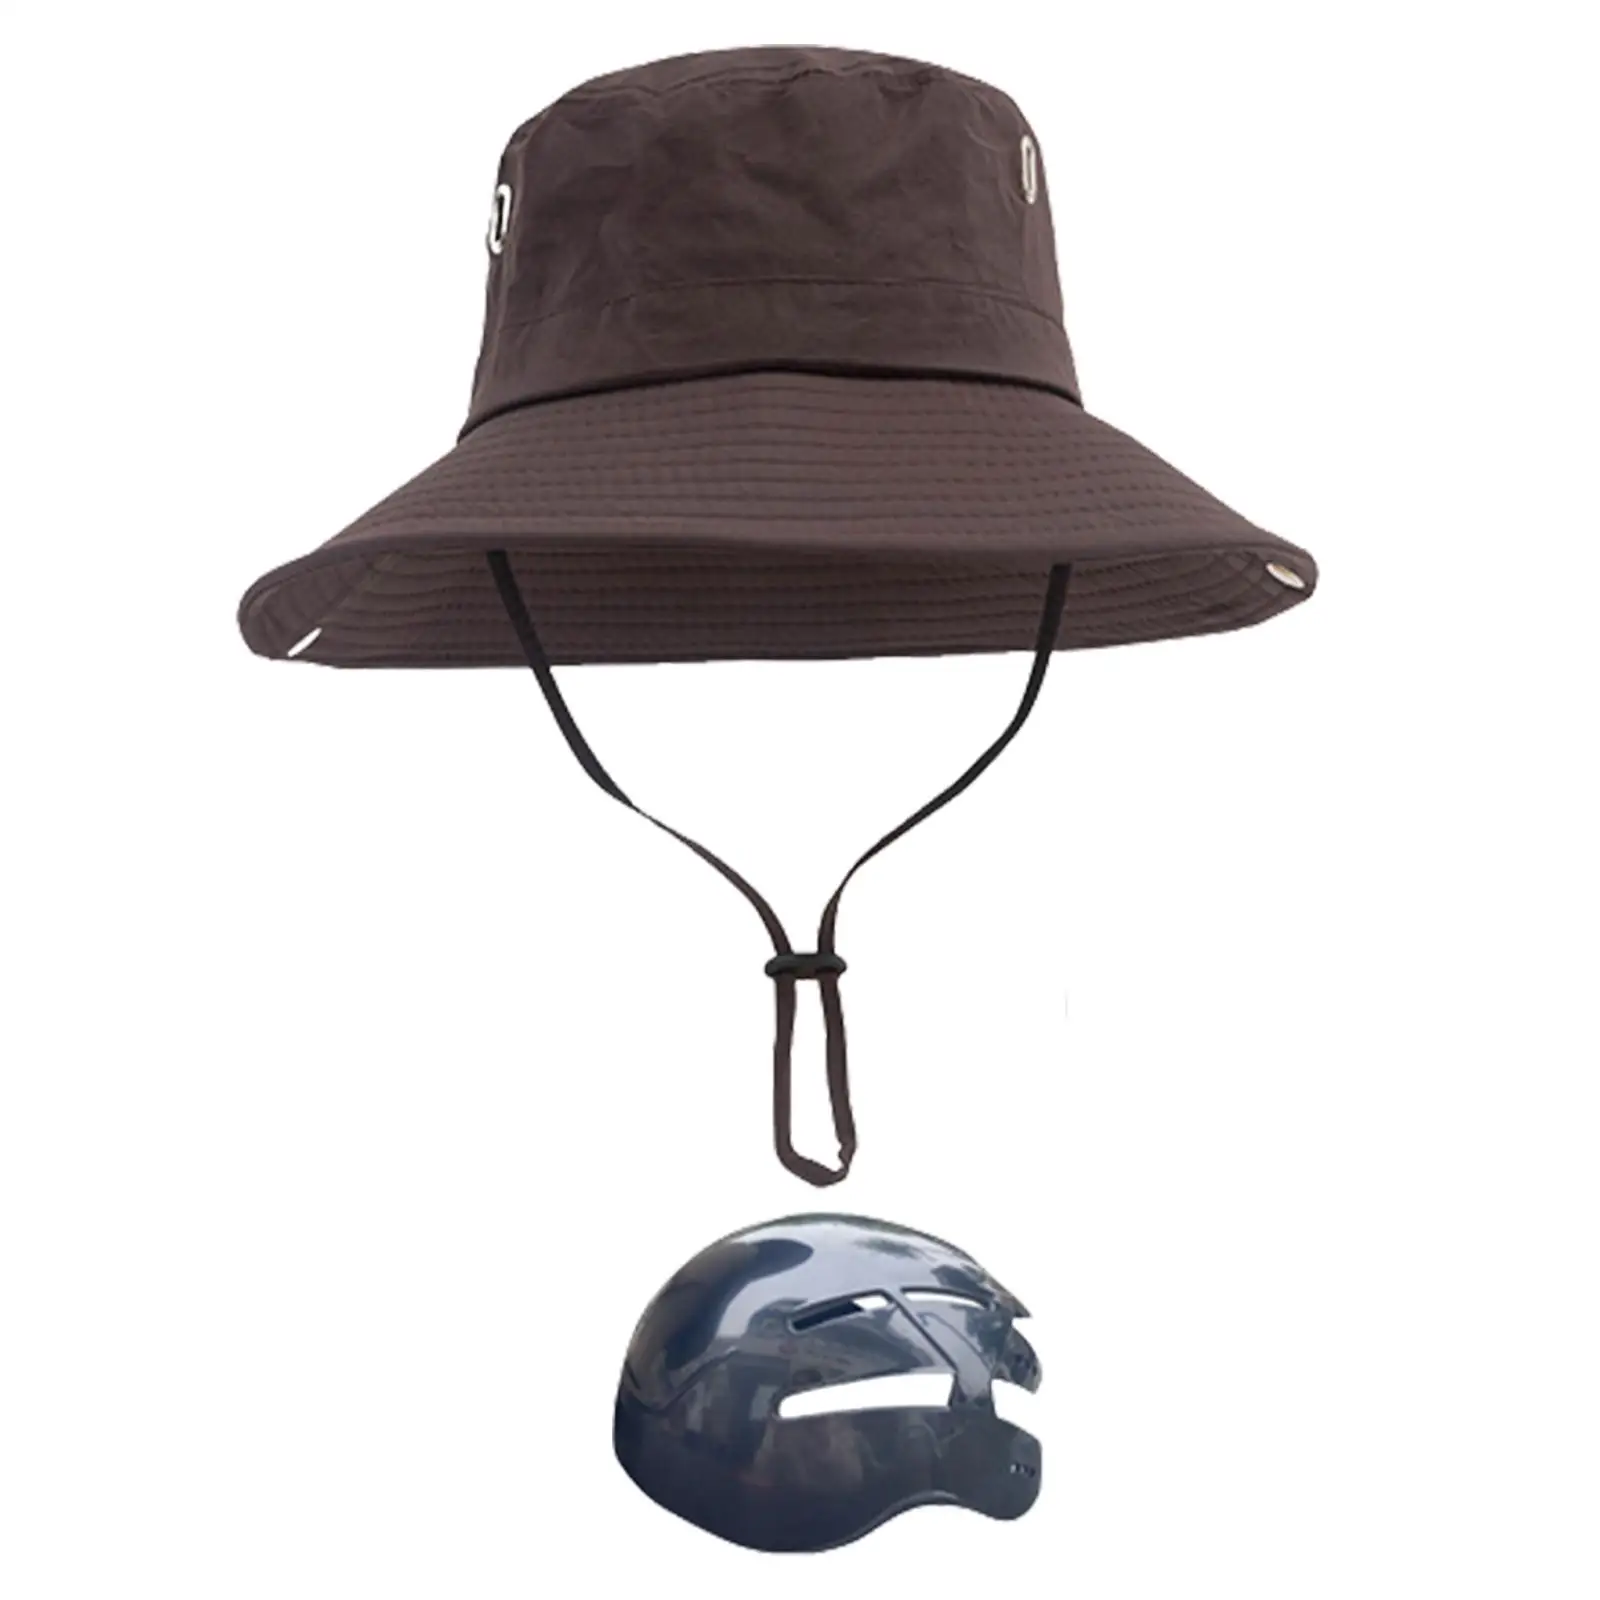 

Bucket Hat with Strings Headwear Foldable Wide Brim Helmet Sun Protection Summer for Golf Fishing Vacation Travel Getaway